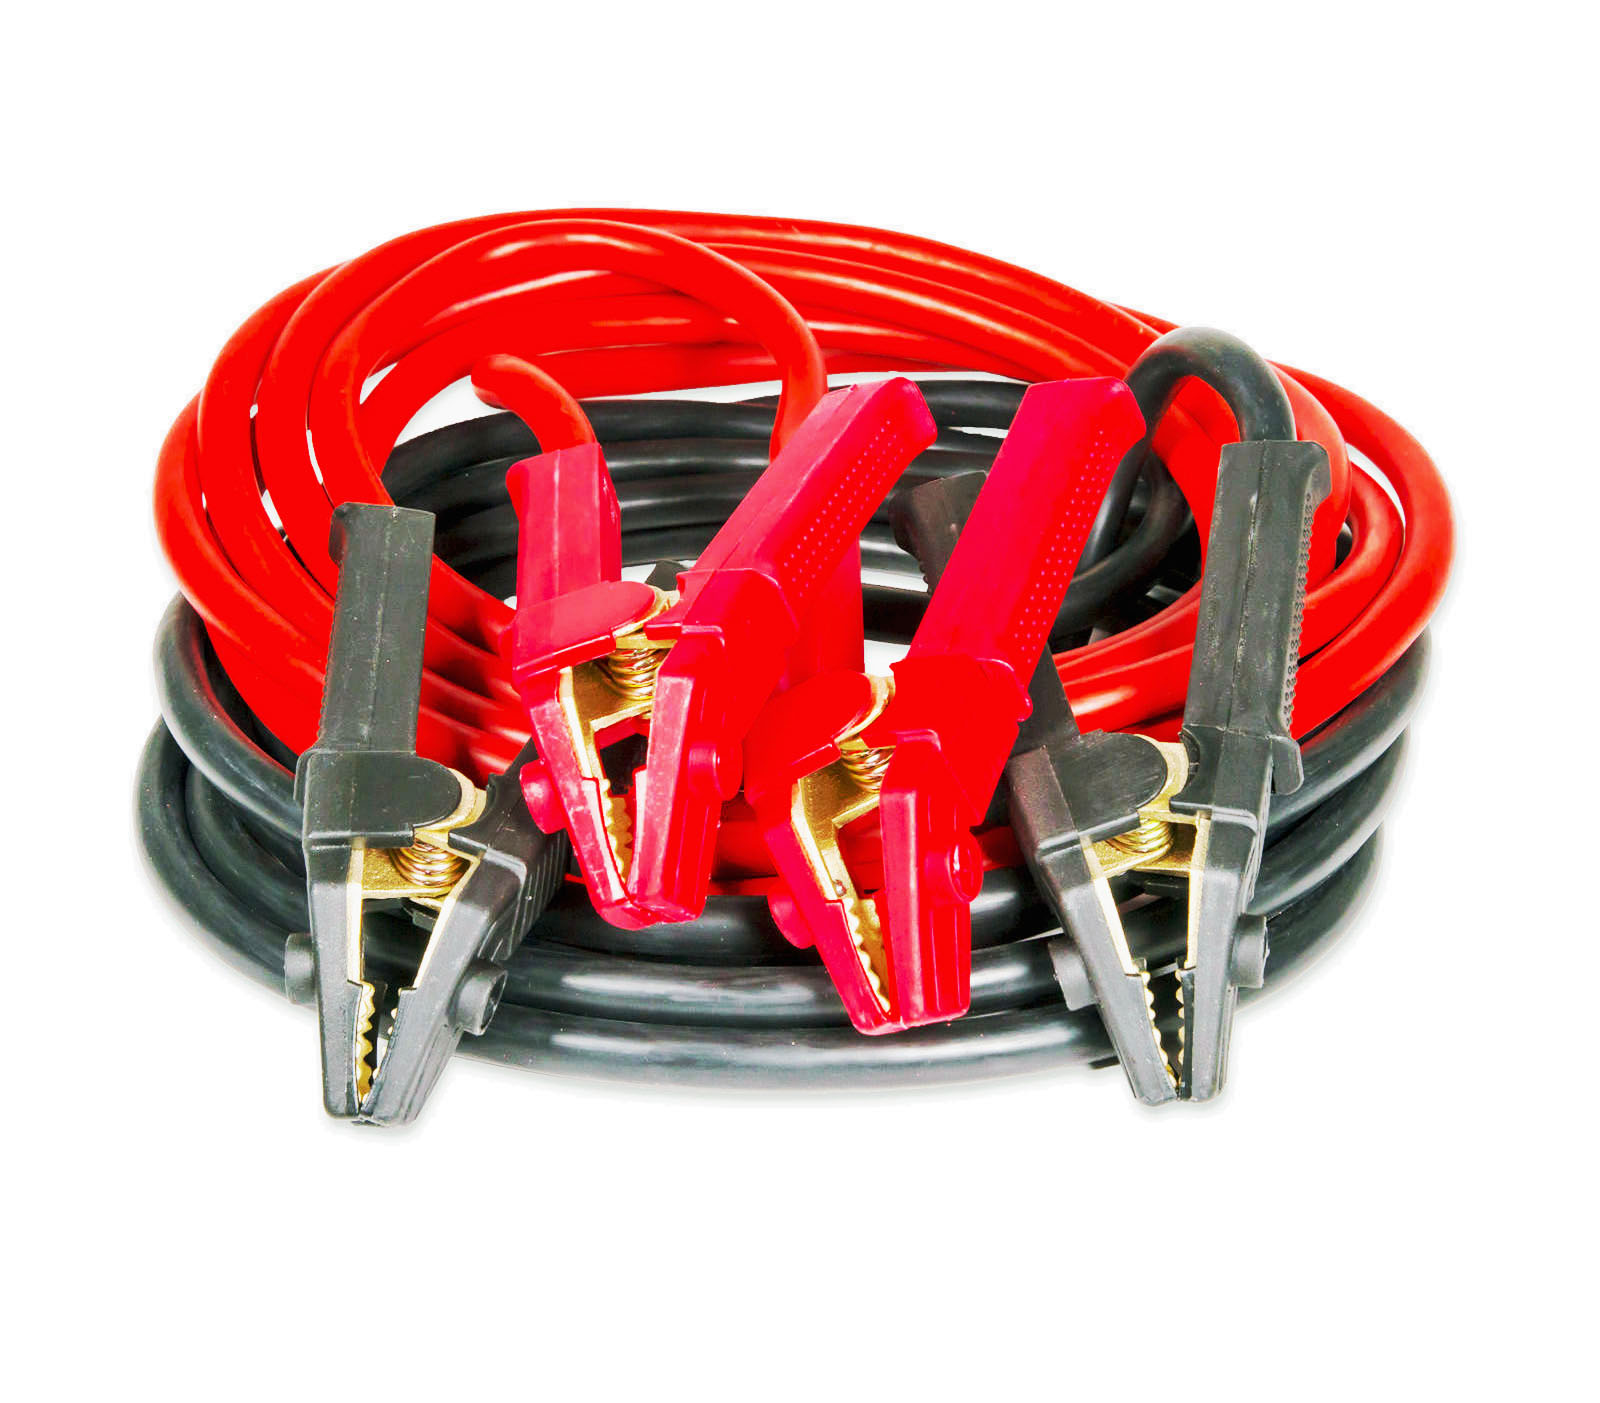 ▷ Jumper cable & | 6m available Outdoor here! 4x4-Equipment Offroad length 1200A Rover, for Nakatanenga Land max. 